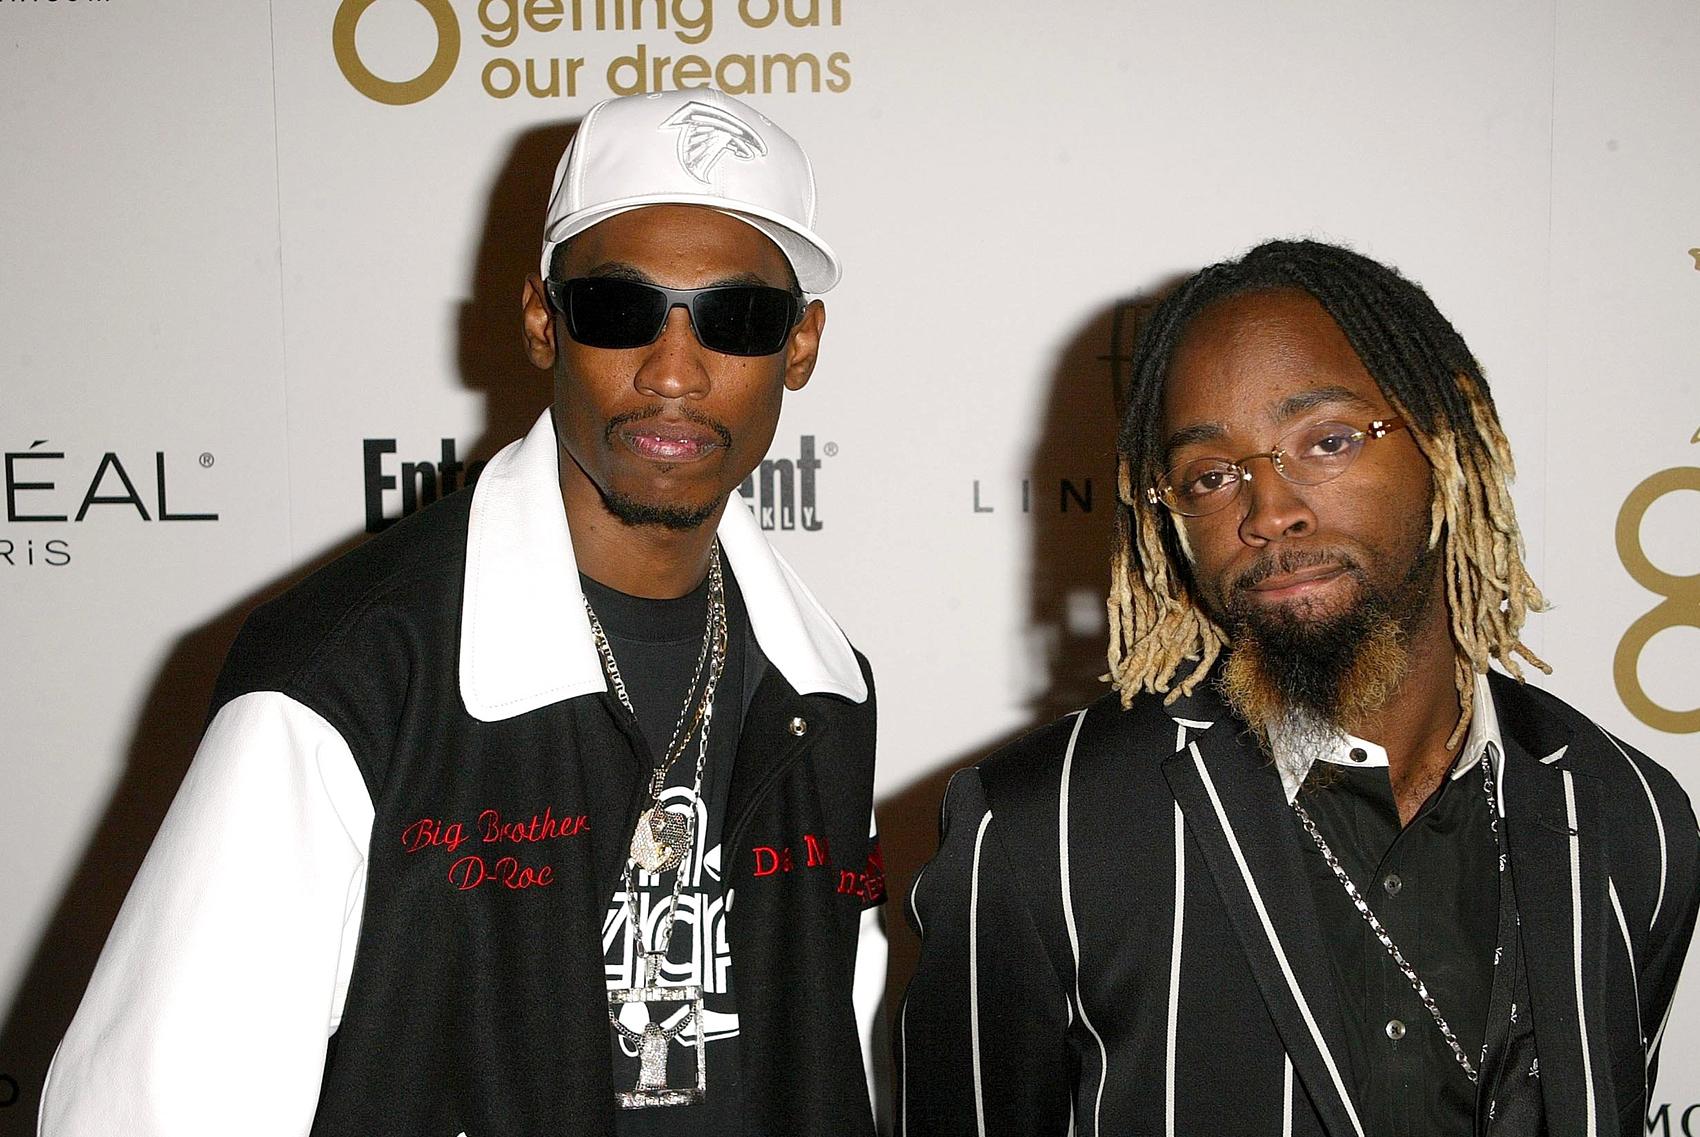 The Ying Yang Twins - Kaine and D Roc.